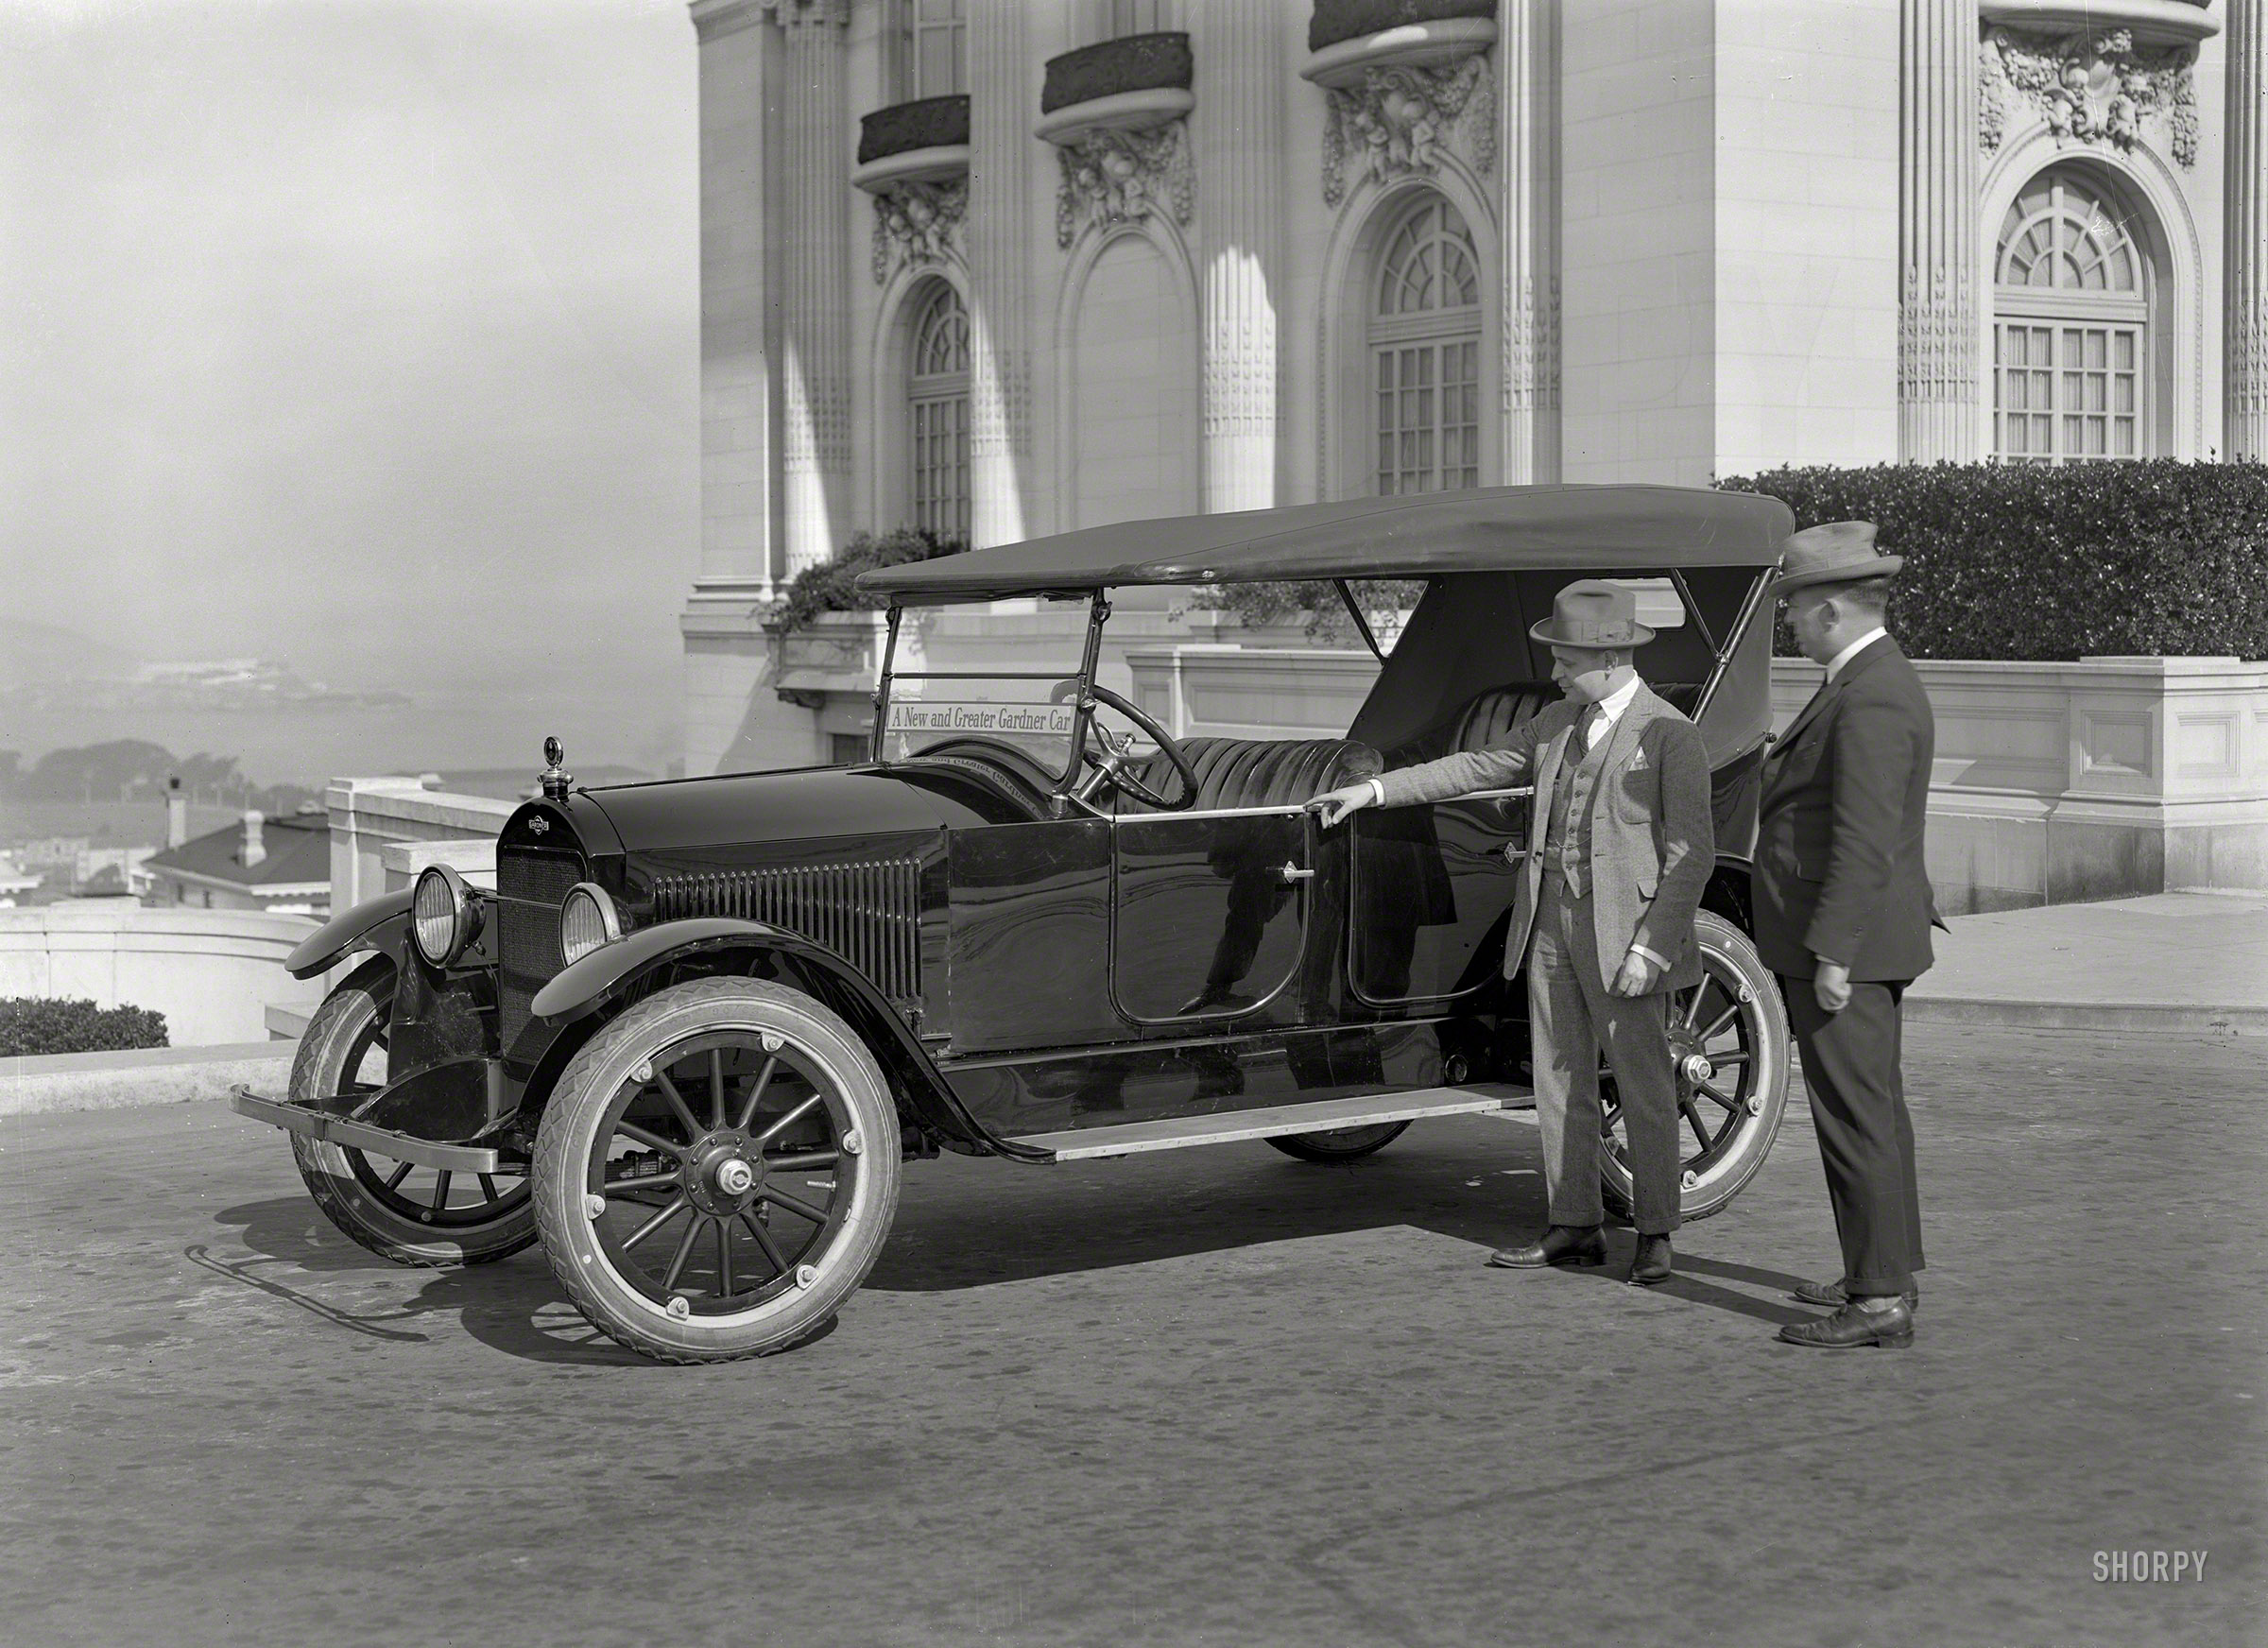 &nbsp; &nbsp; &nbsp; &nbsp; The "New and Greater Gardner" numbered, among its 30 Quality Features for 1922, "curled hair filled cushions, aluminum moulding on body, windshield wiper, Willard threaded rubber battery, door-opening curtains, and clear-vision top covered with Chase Dreadnaught double-texture material."
San Francisco circa 1921. "Gardner car at Spreckels Mansion." 5x7 glass negative by the Bay Area automotive impresario Christopher Helin. View full size.